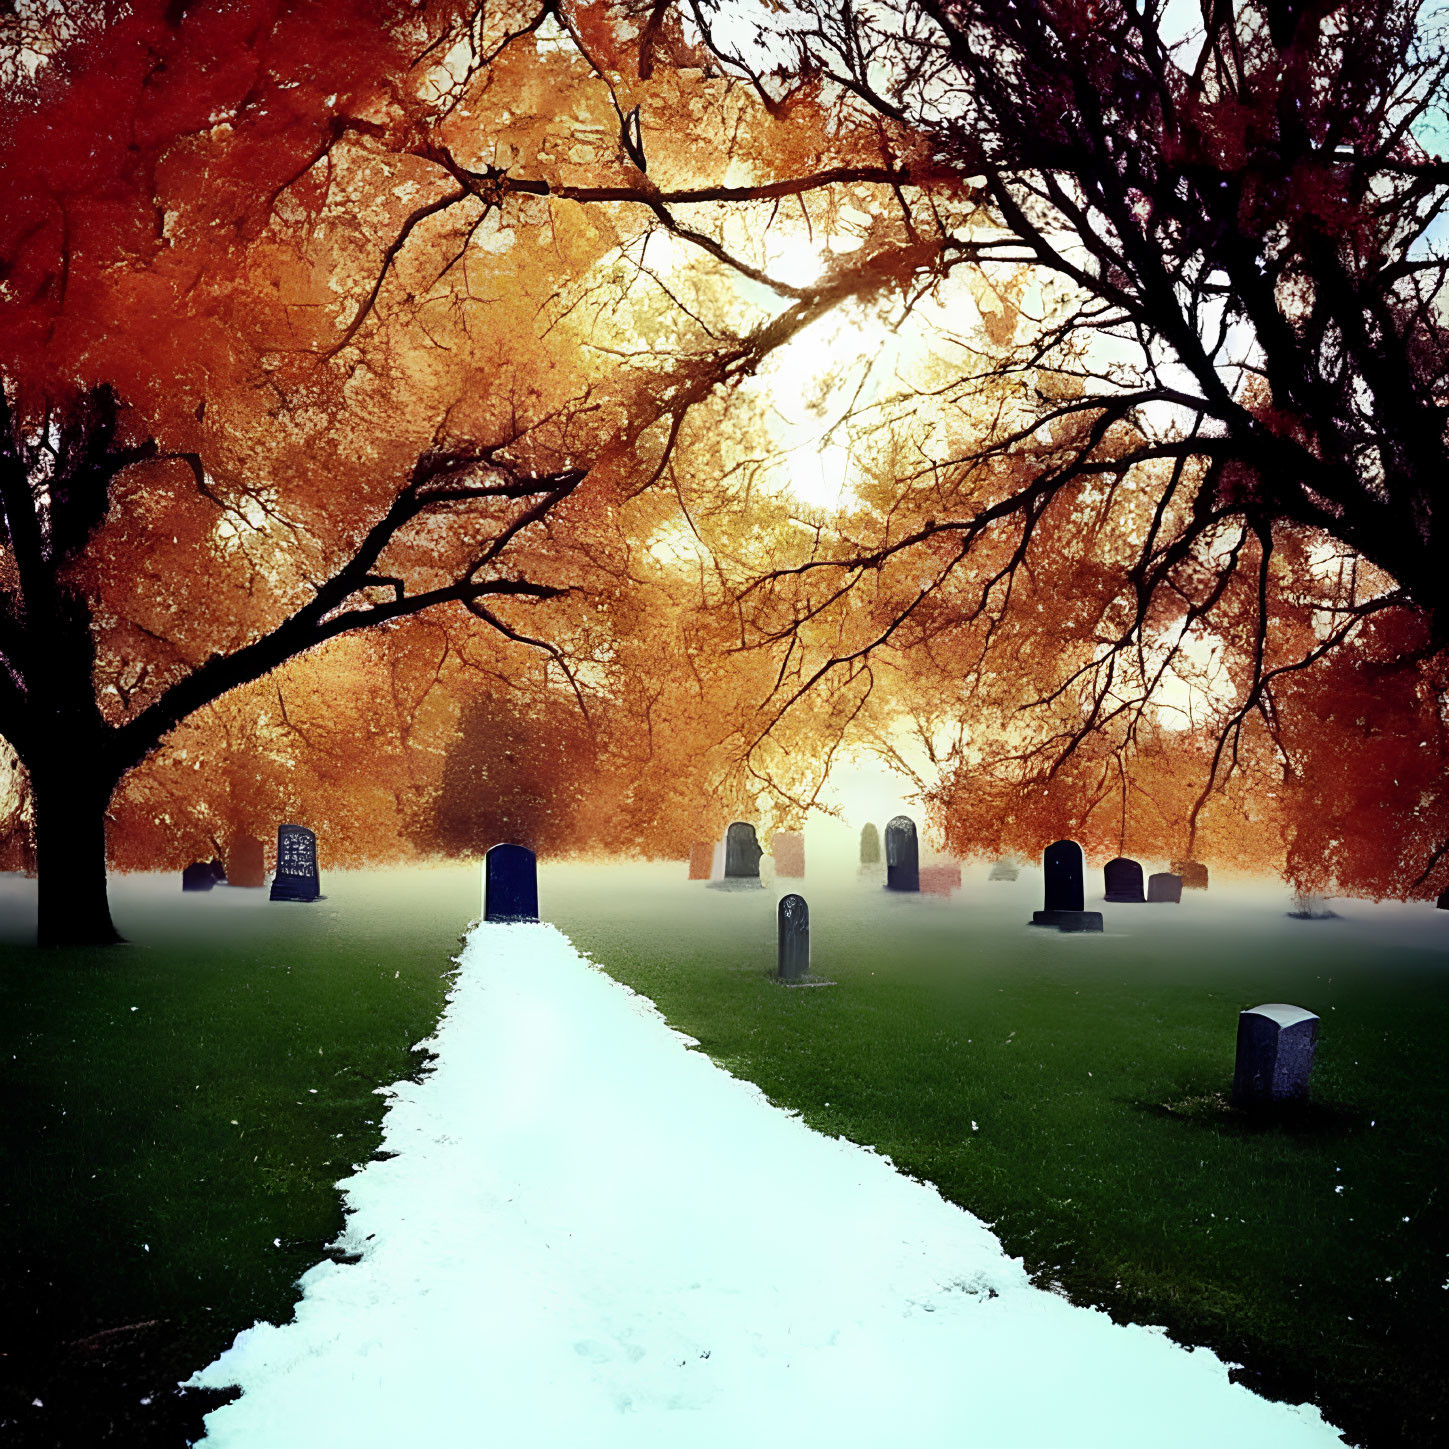 Snowy Pathway in Cemetery with Vibrant Autumn Trees